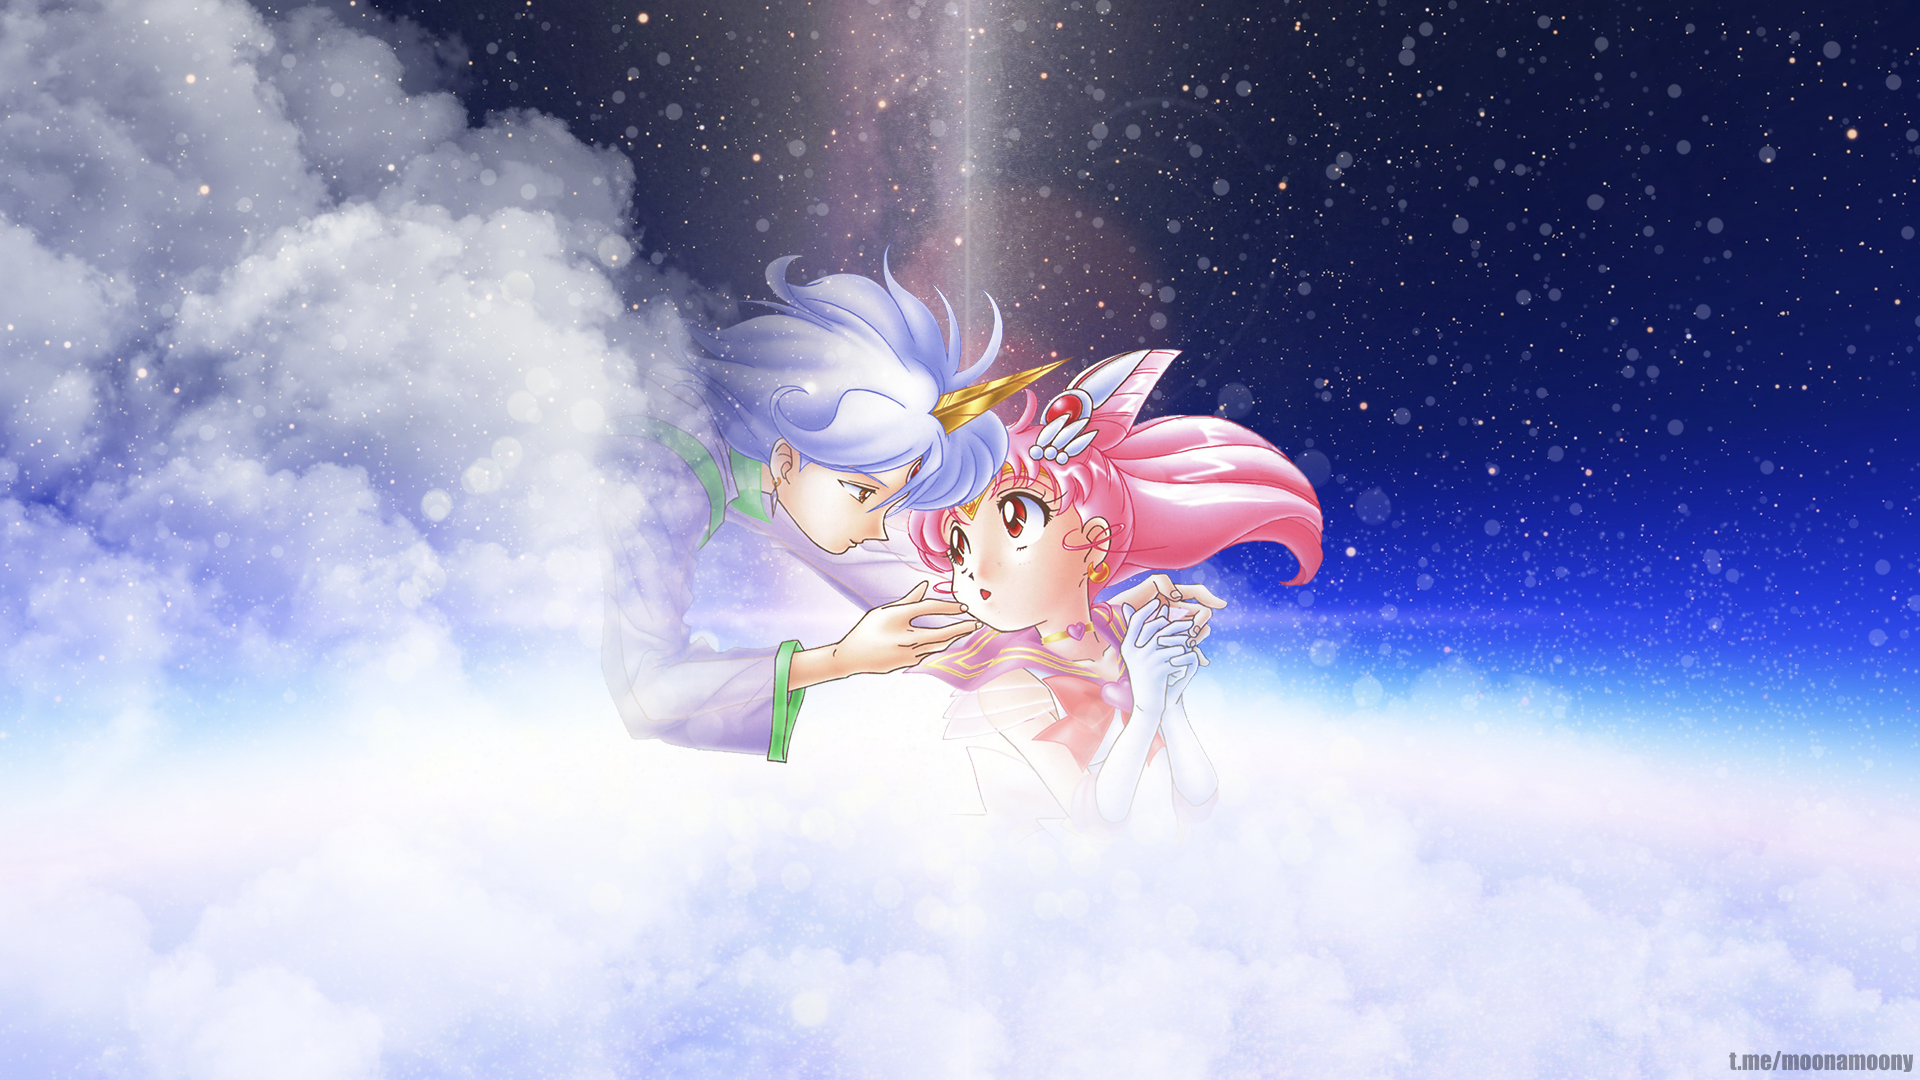 Picture In Picture Anime Anime Girls Sailor Chibi Moon Space Clouds Fantasy Girl Stars Anime Boys 1920x1080